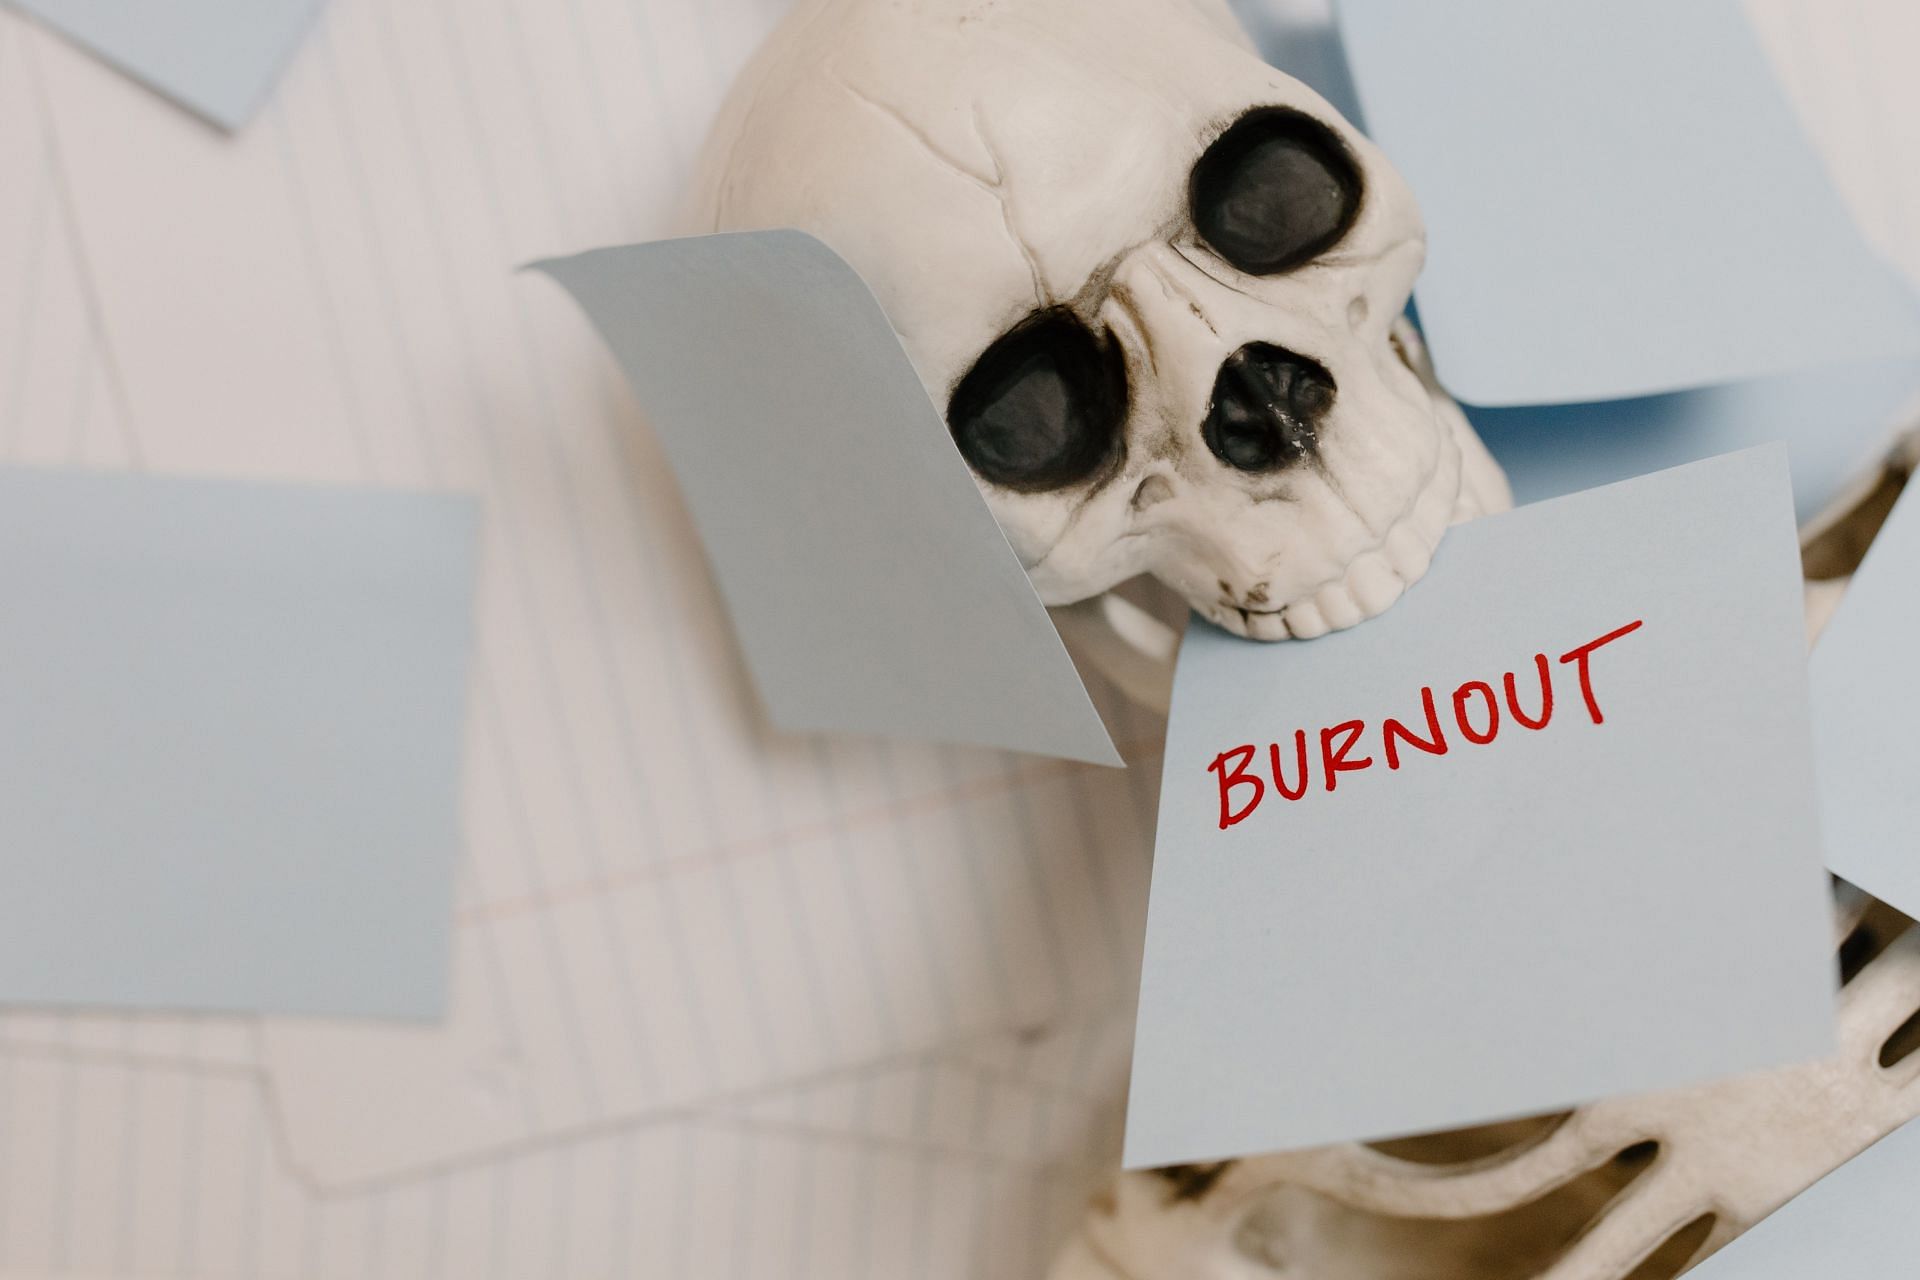 What are the most common signs of burnout? (Image via Pexels/ Tara)